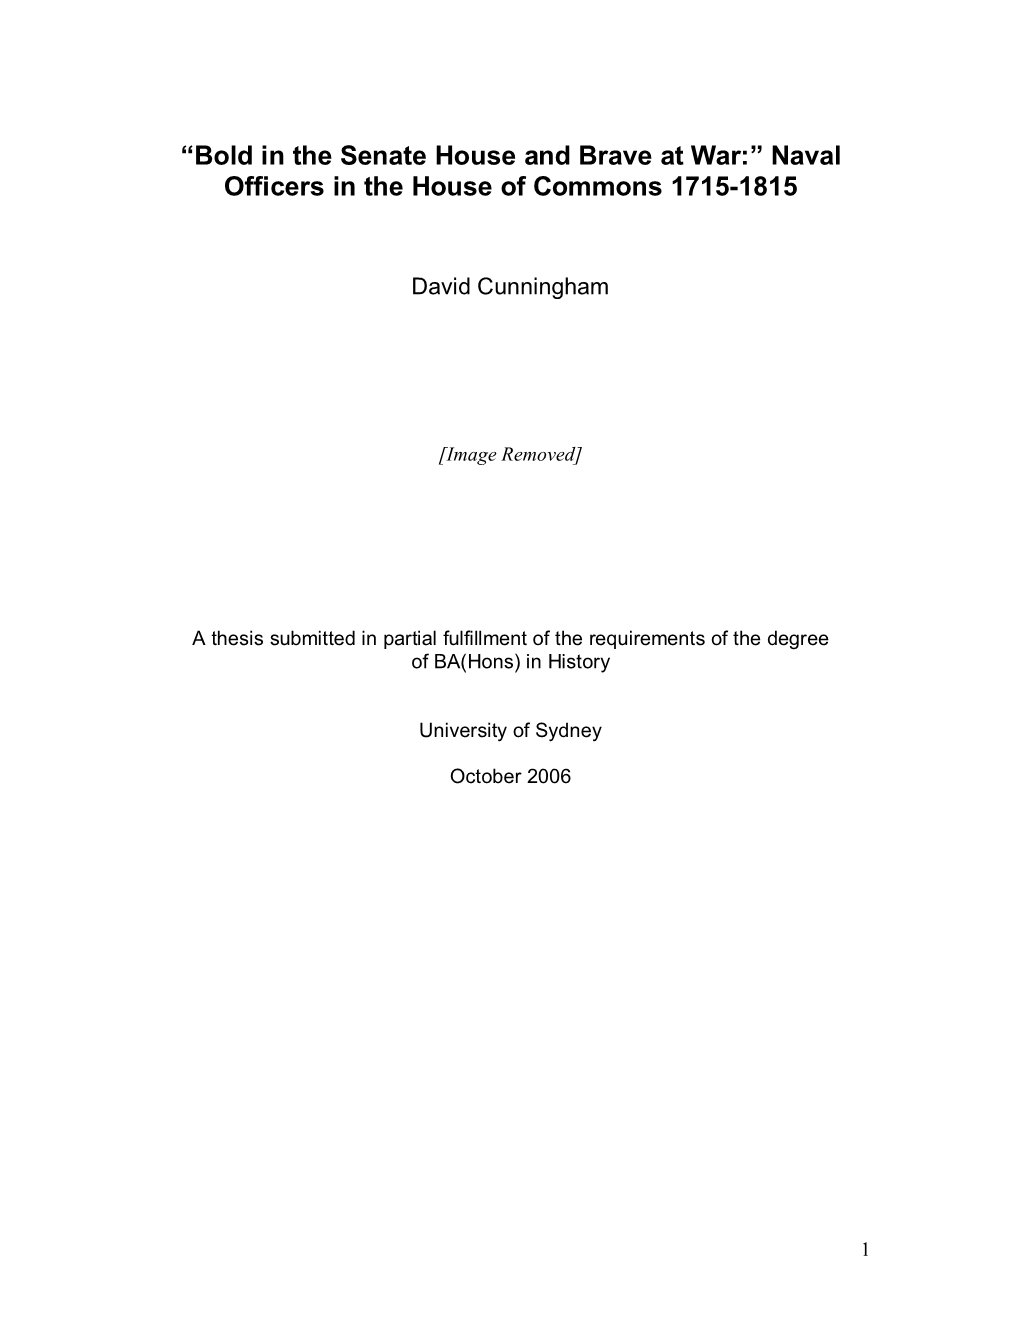 Naval Officers in the House of Commons 1715-1815